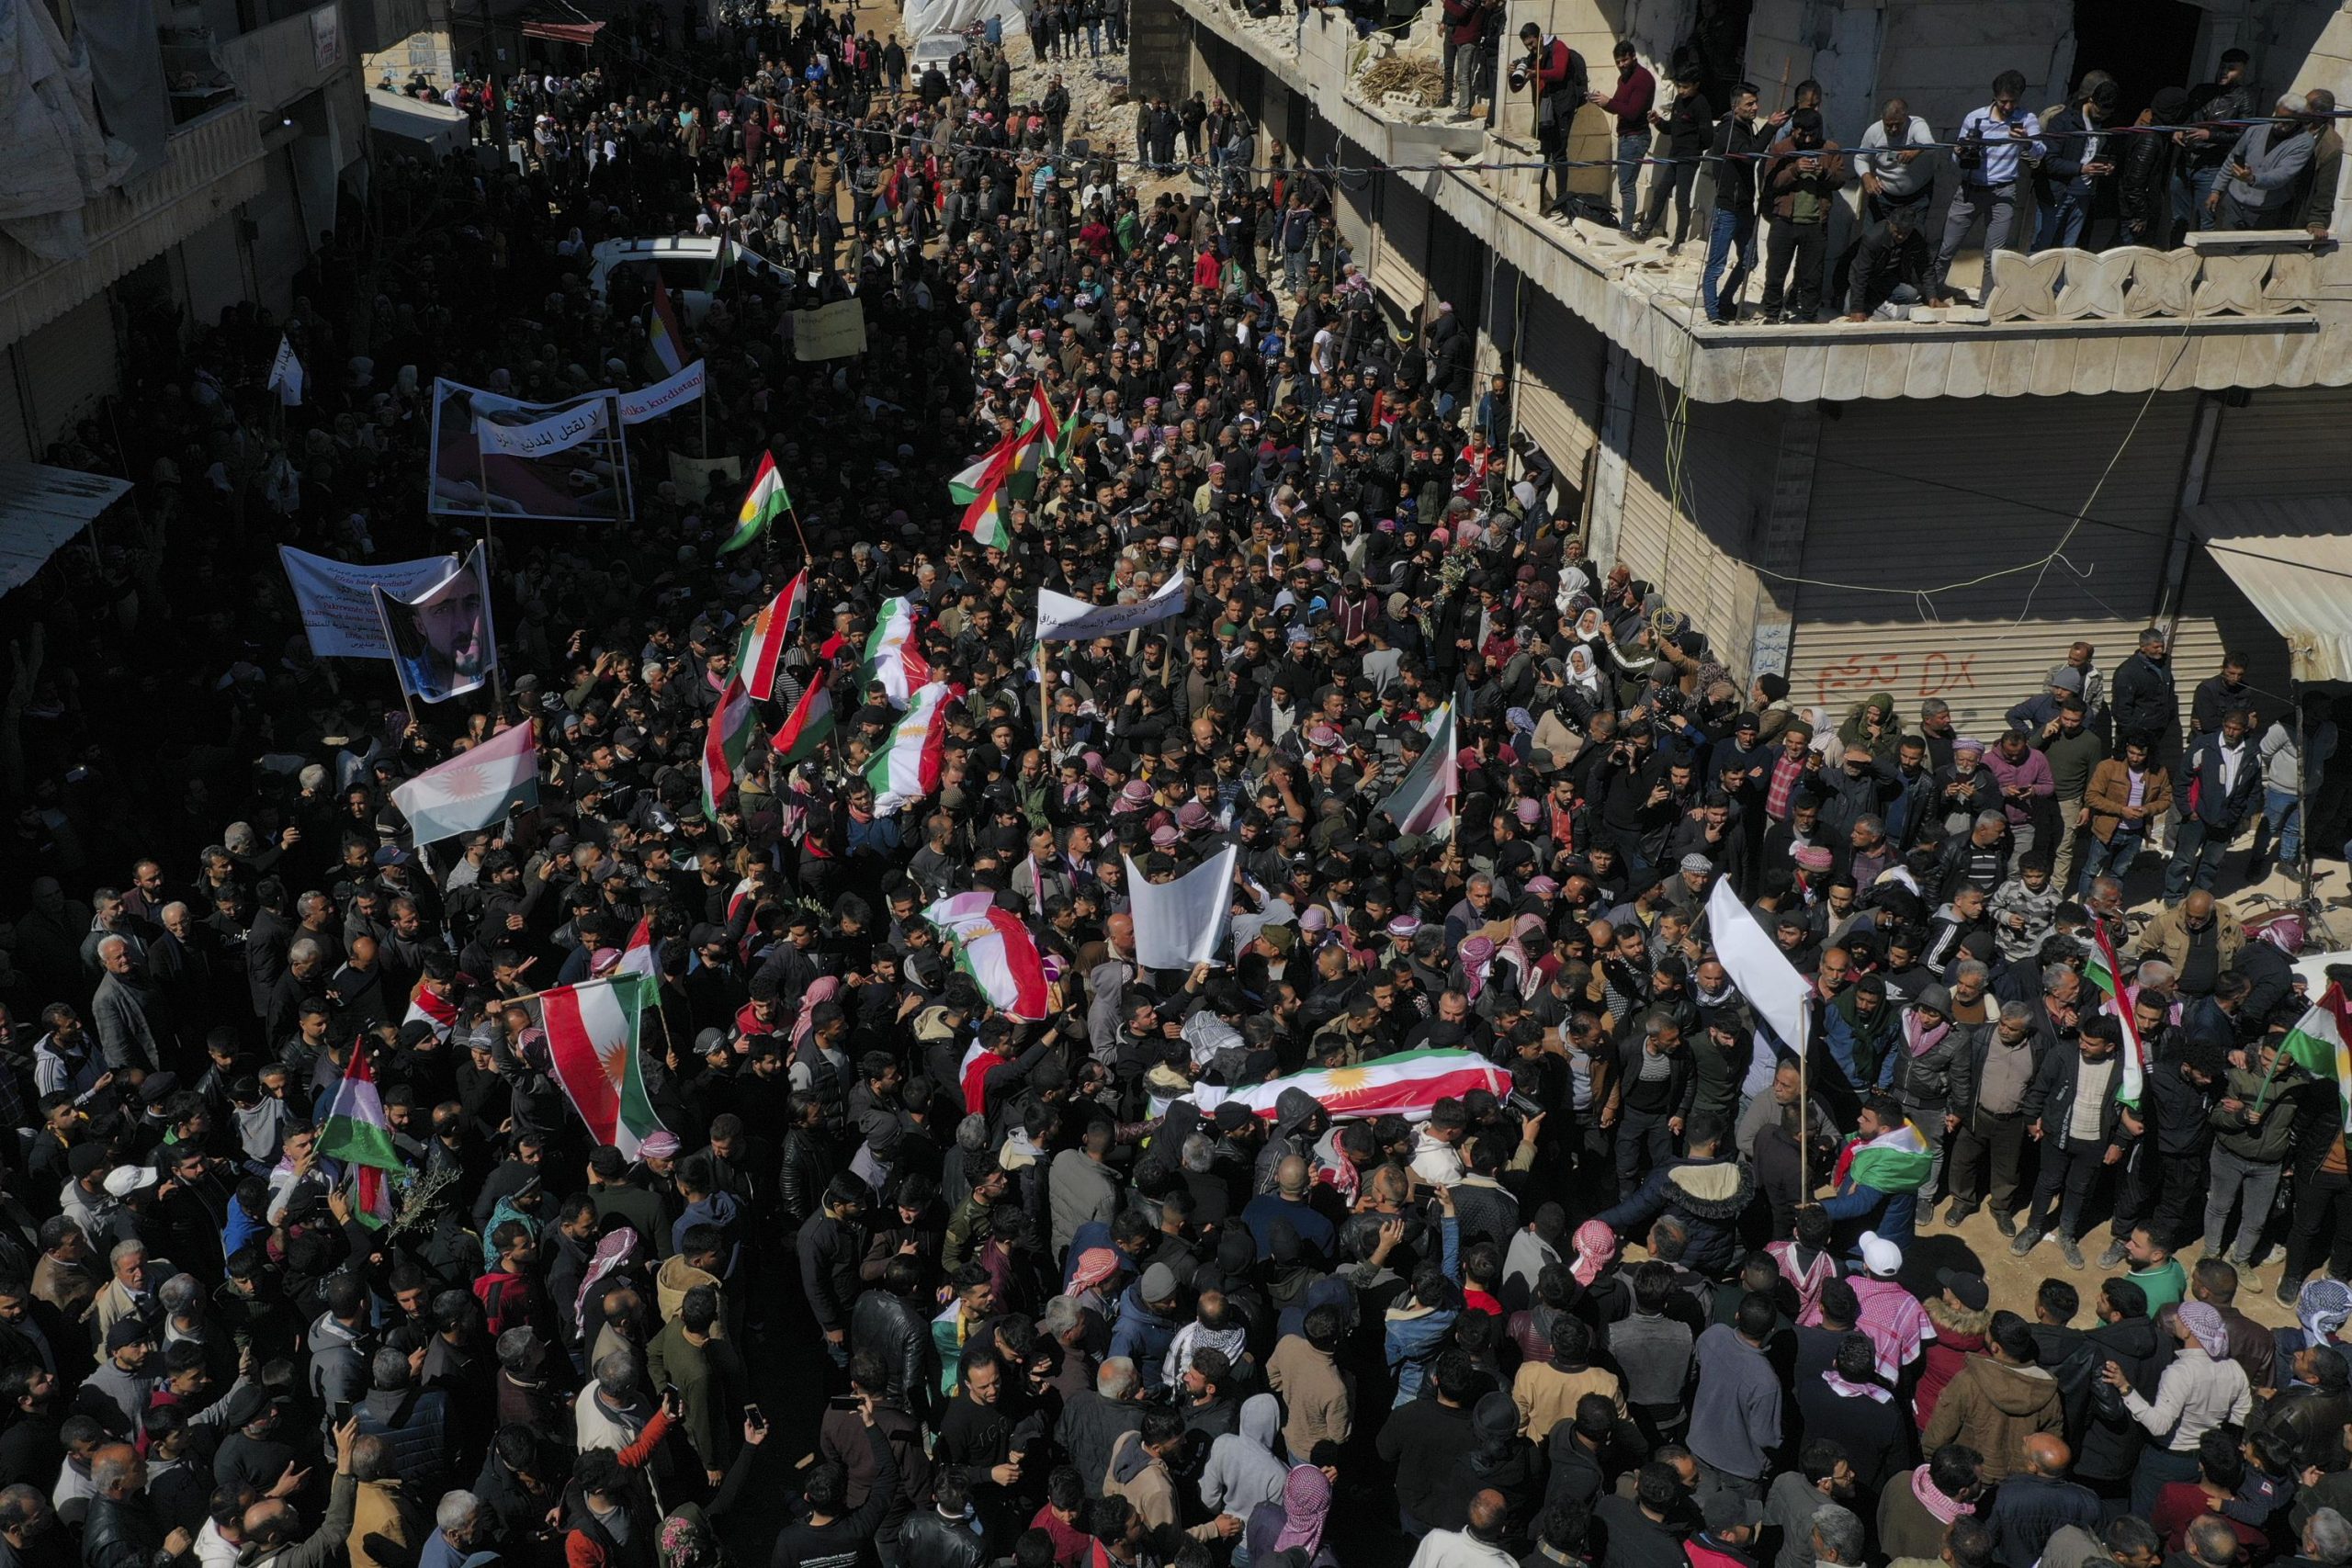 Killing of Kurds in northern Syria sparks protests, tensions 6